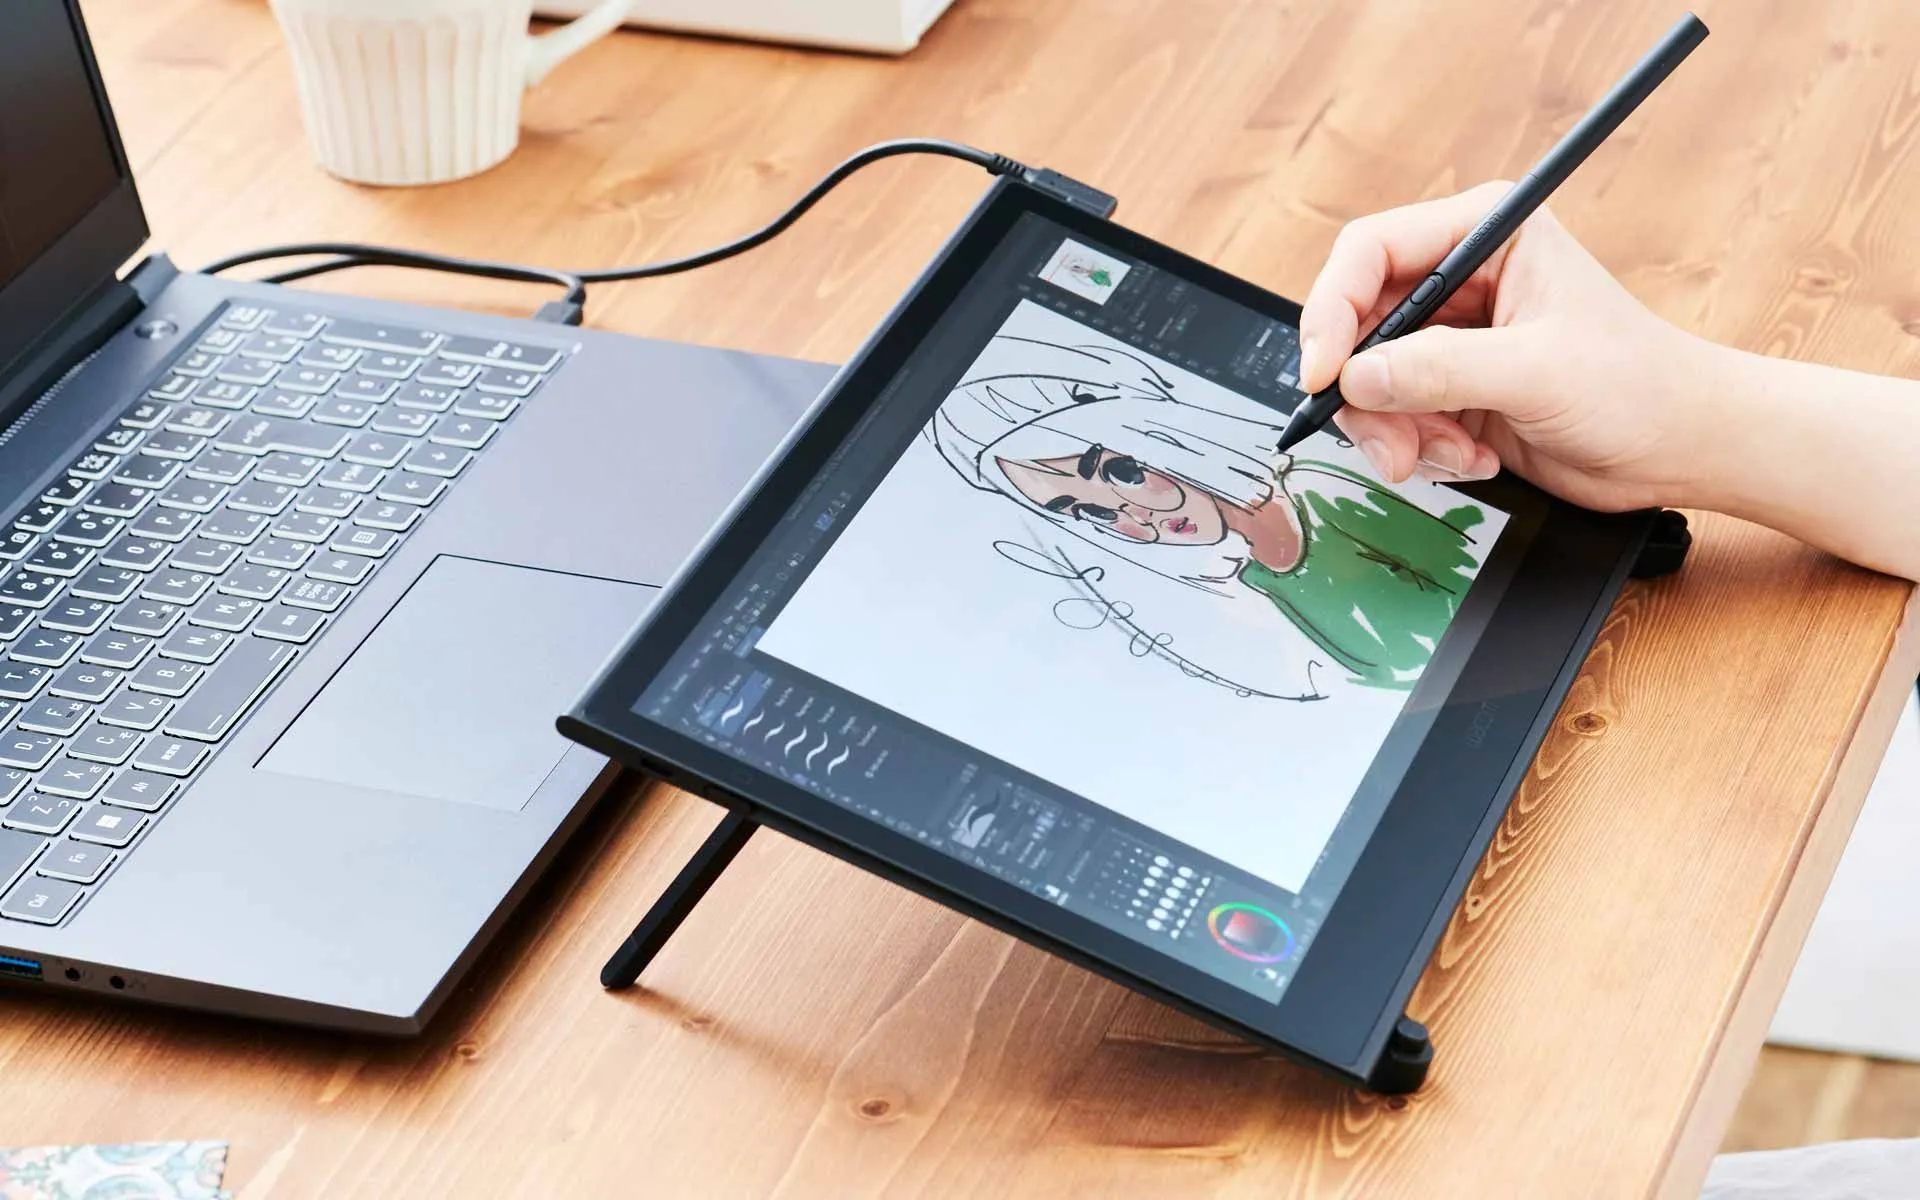 A person's hand using a stylus on a digital drawing tablet that's connected to a laptop, working on a cartoon illustration of a girl with blonde hair.